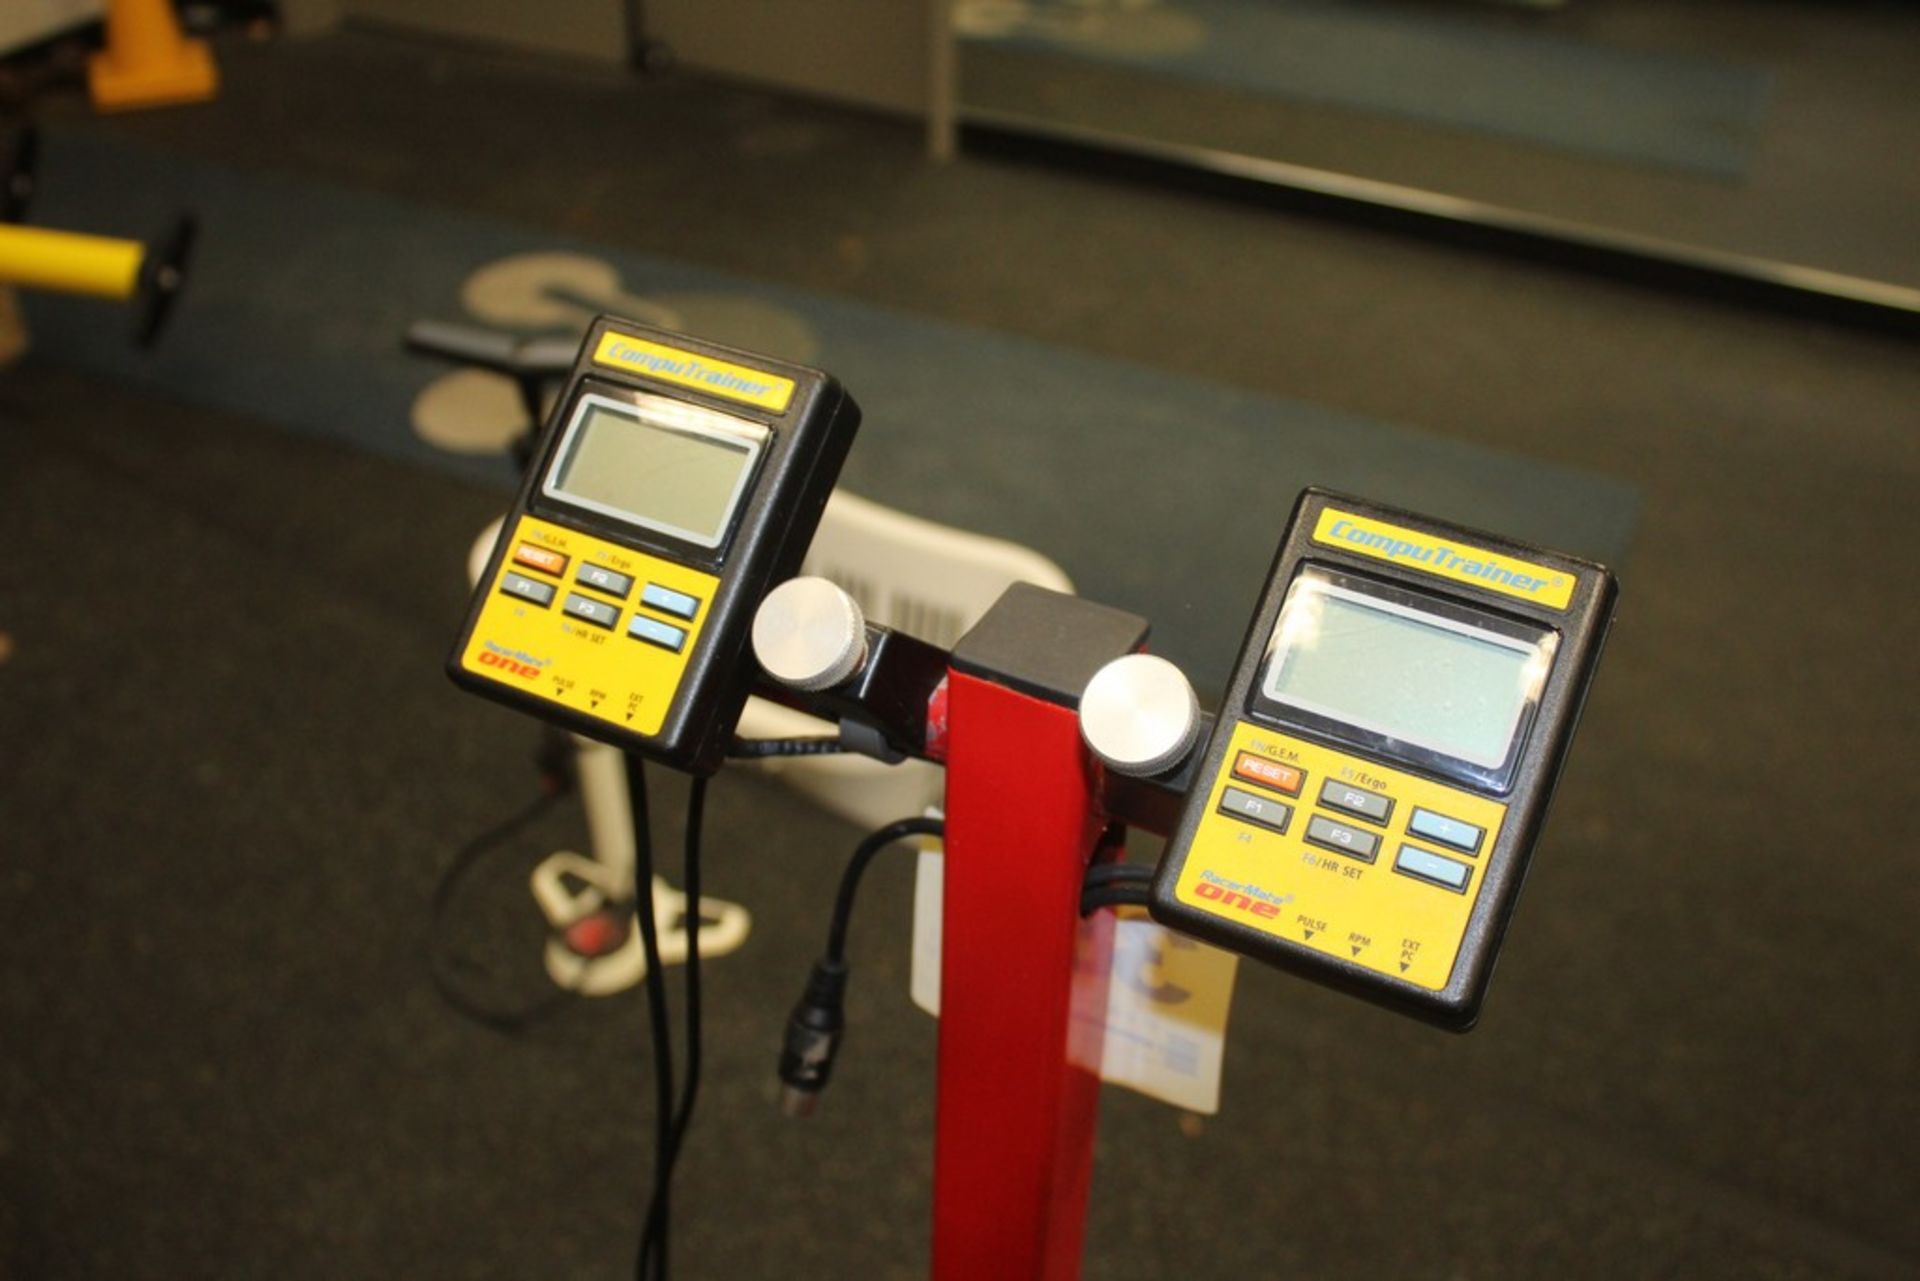 TWO POSITION COMPUTER TRAINING BICYCLE STANDS WITH (2) COMPUTRAINER MONITORS - Image 3 of 3